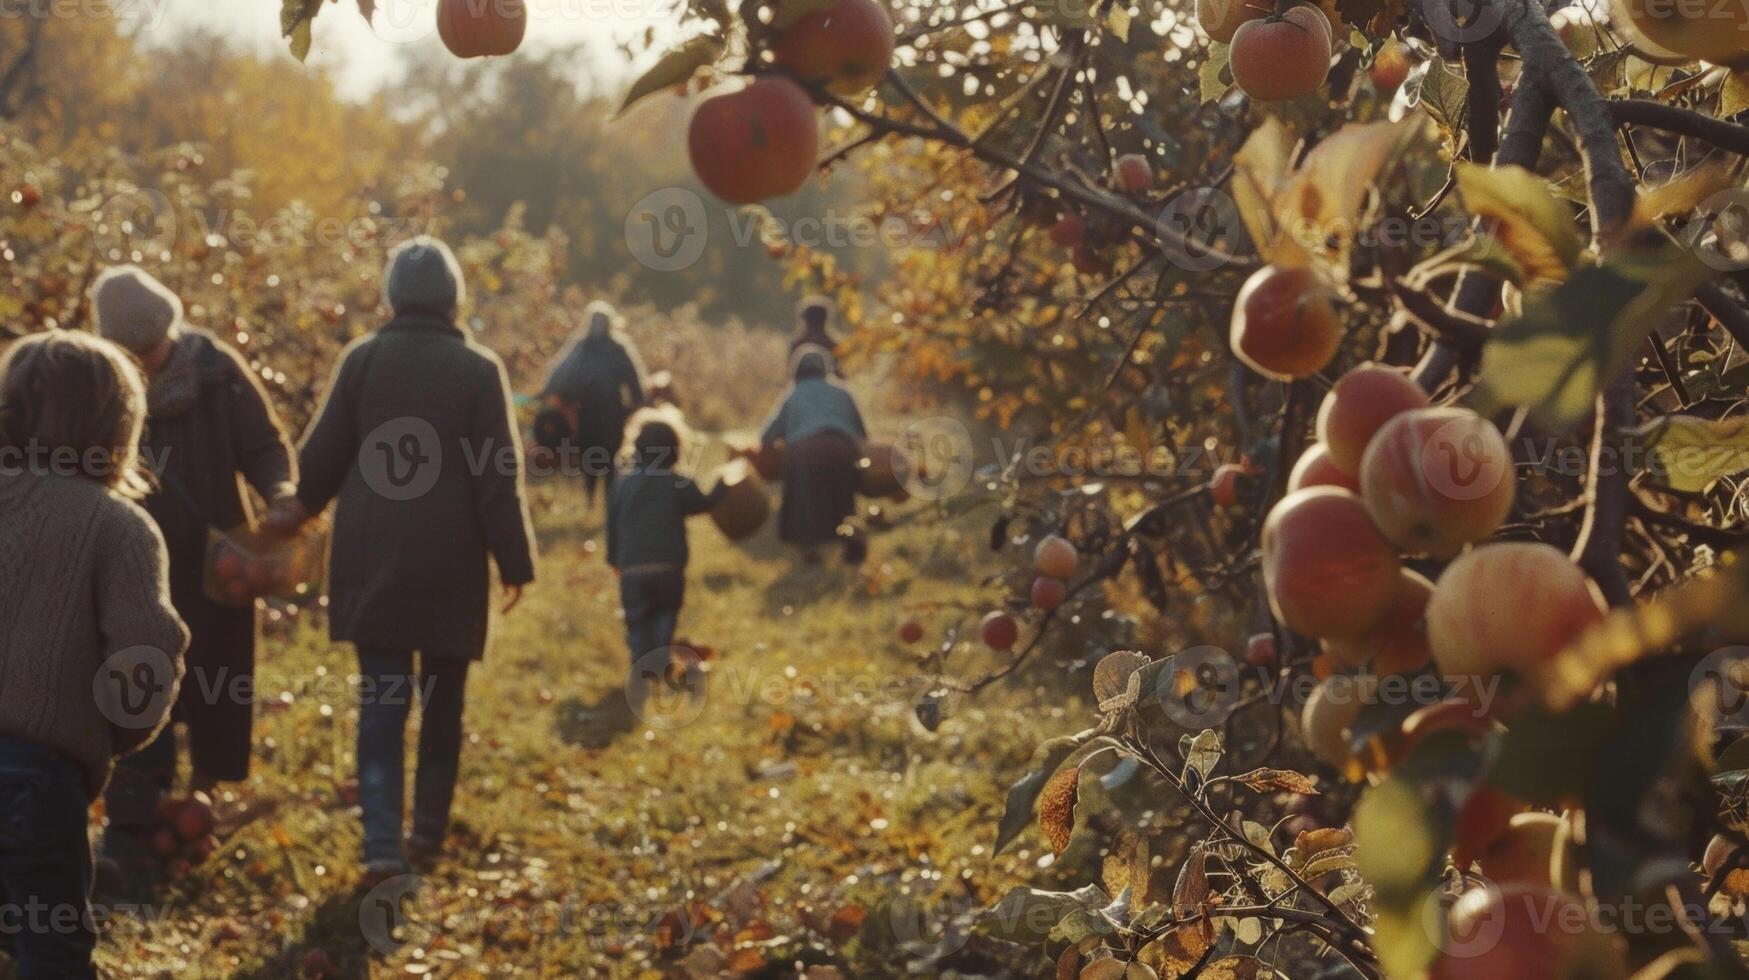 A trip to a nearby apple orchard where members pick their own apples to use in homemade cider photo